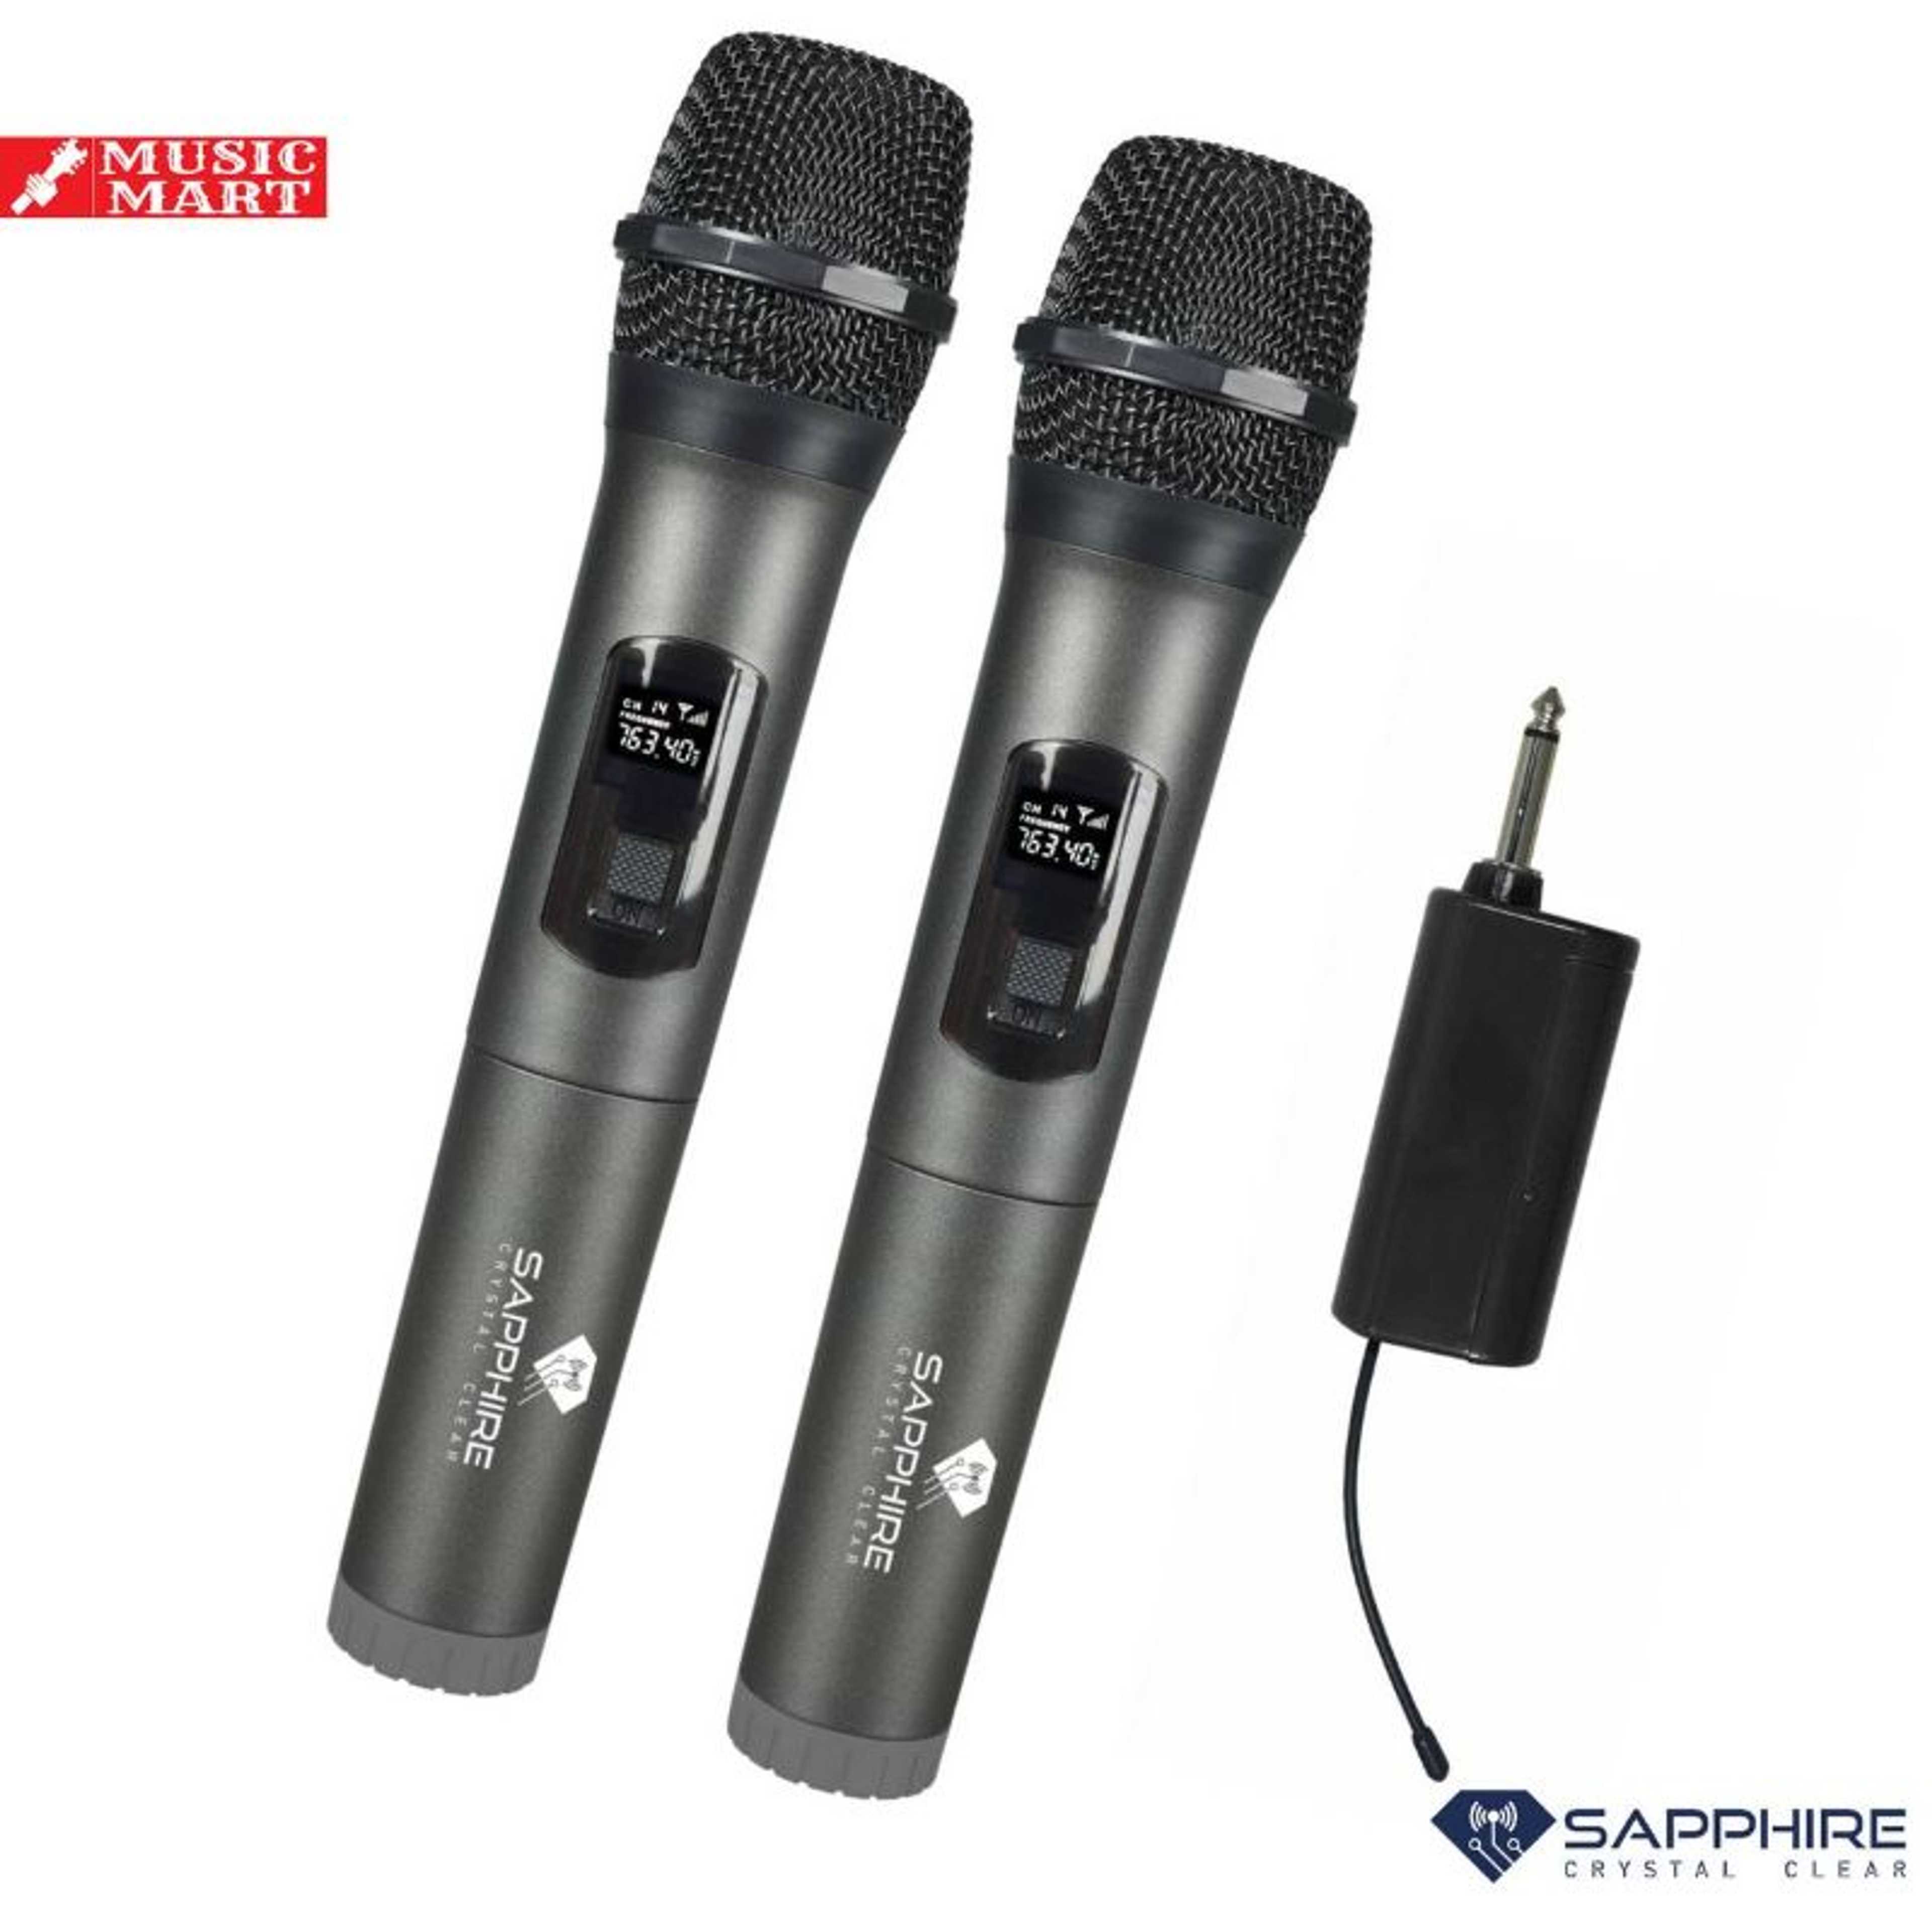 WIRELESS MICROPHONE SYSTEM 2 MICROPHONE - HIGH FREQUENCY - BEST QUALITY -  EXCELLENT PERFORMANCE - BEST FOR LIVE CONCERTS - PRECISE QUALITY - Portable rechargeable receiver for hassle free installation